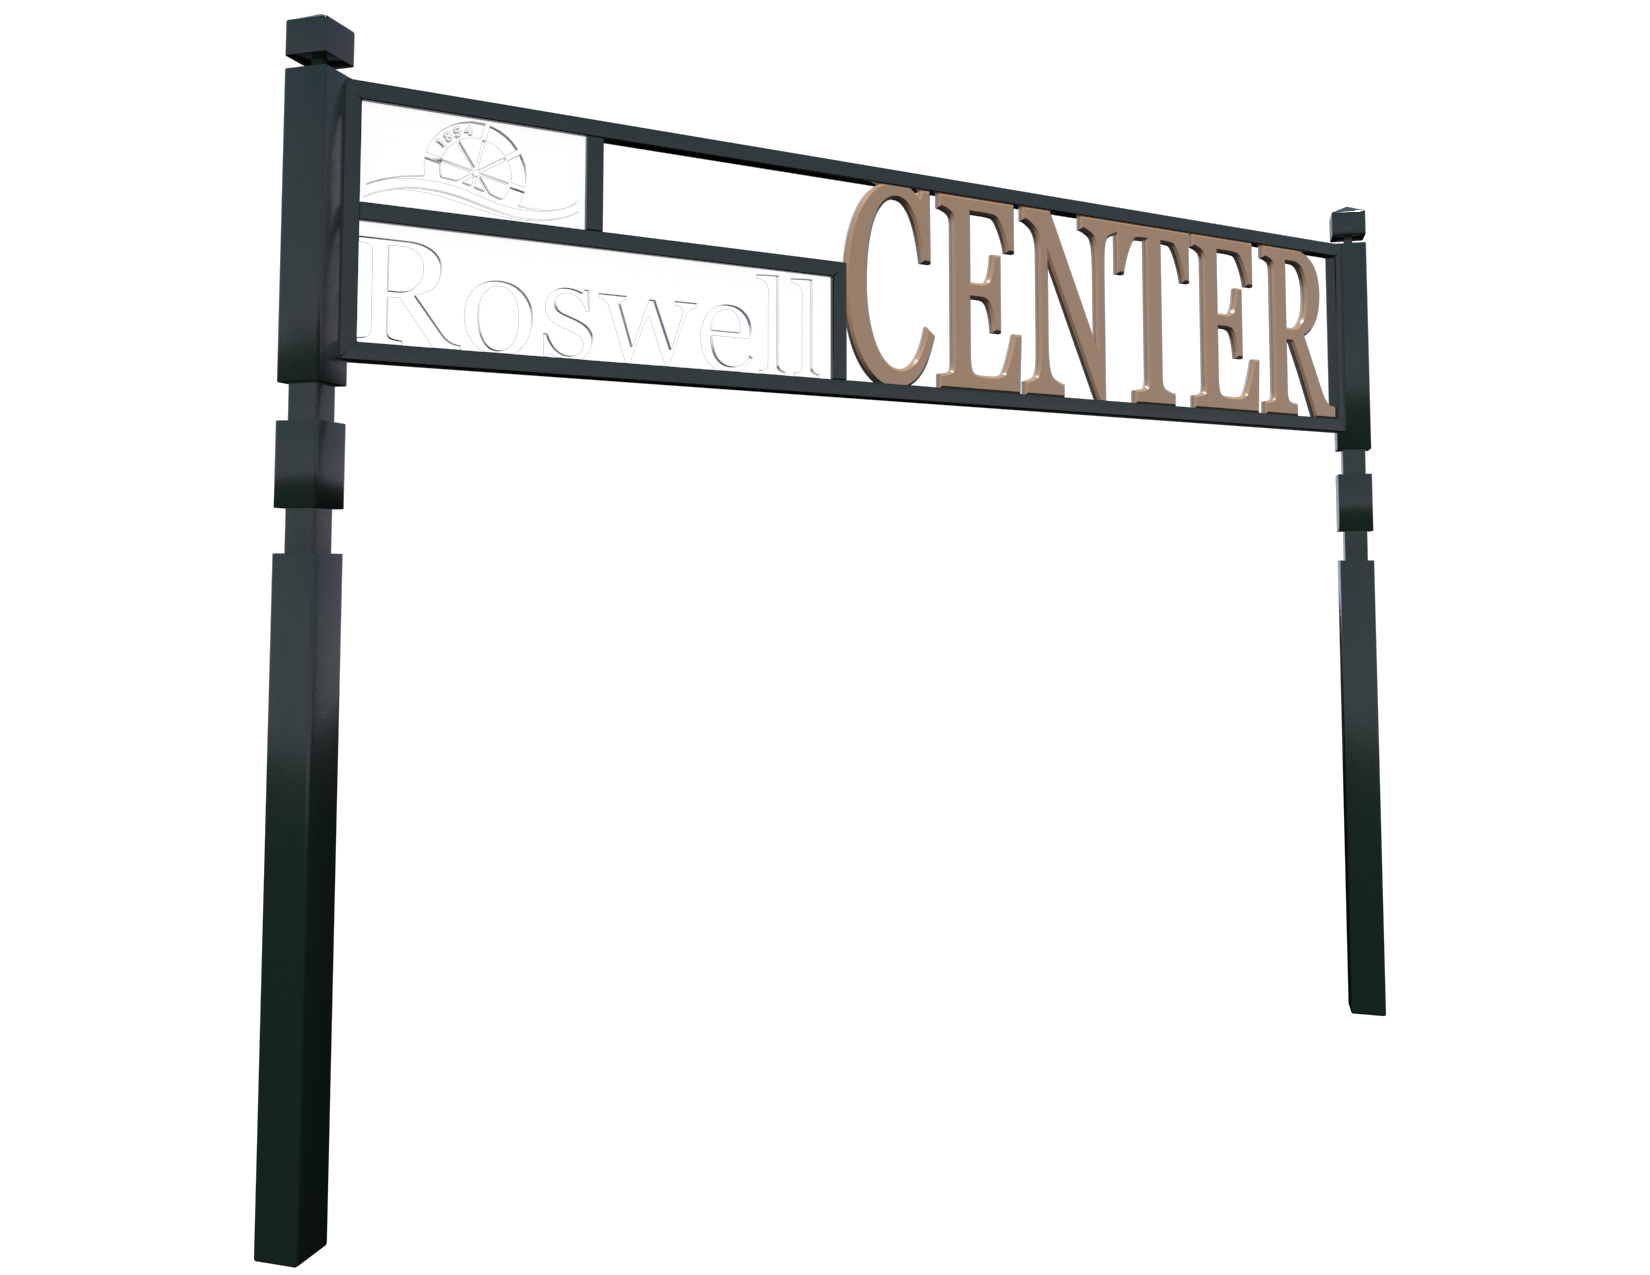 Catalogue_RoswellCenter_Camera02.png